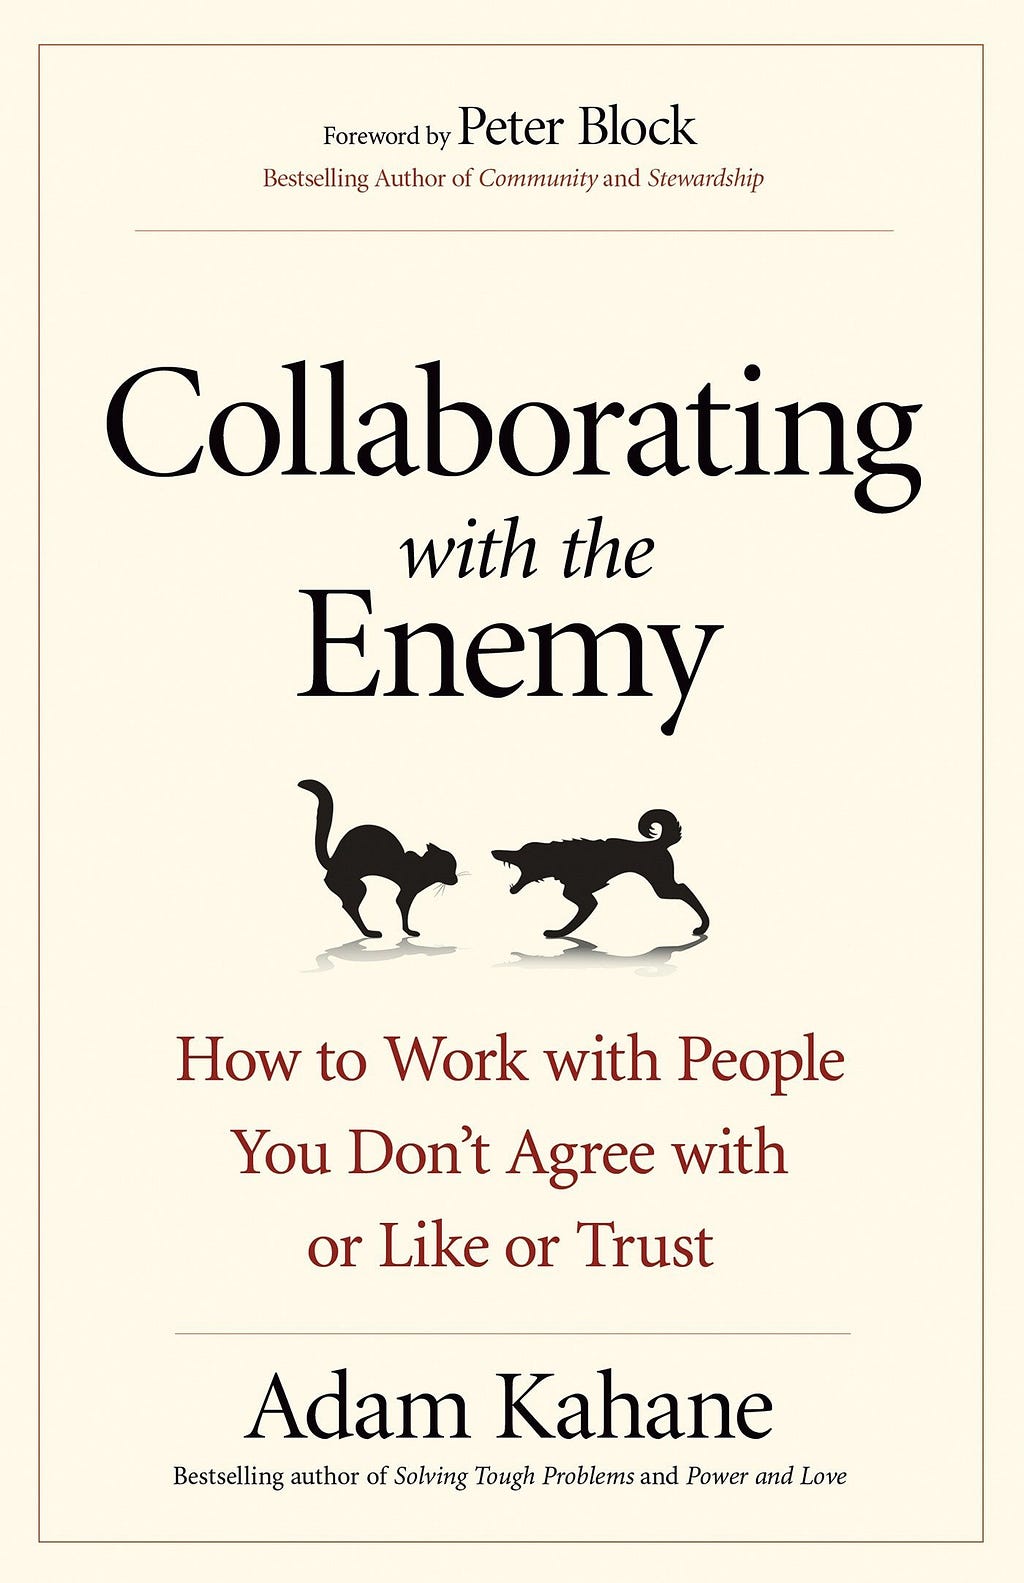 Cover of the book ‘Collaborating with the Enemy’